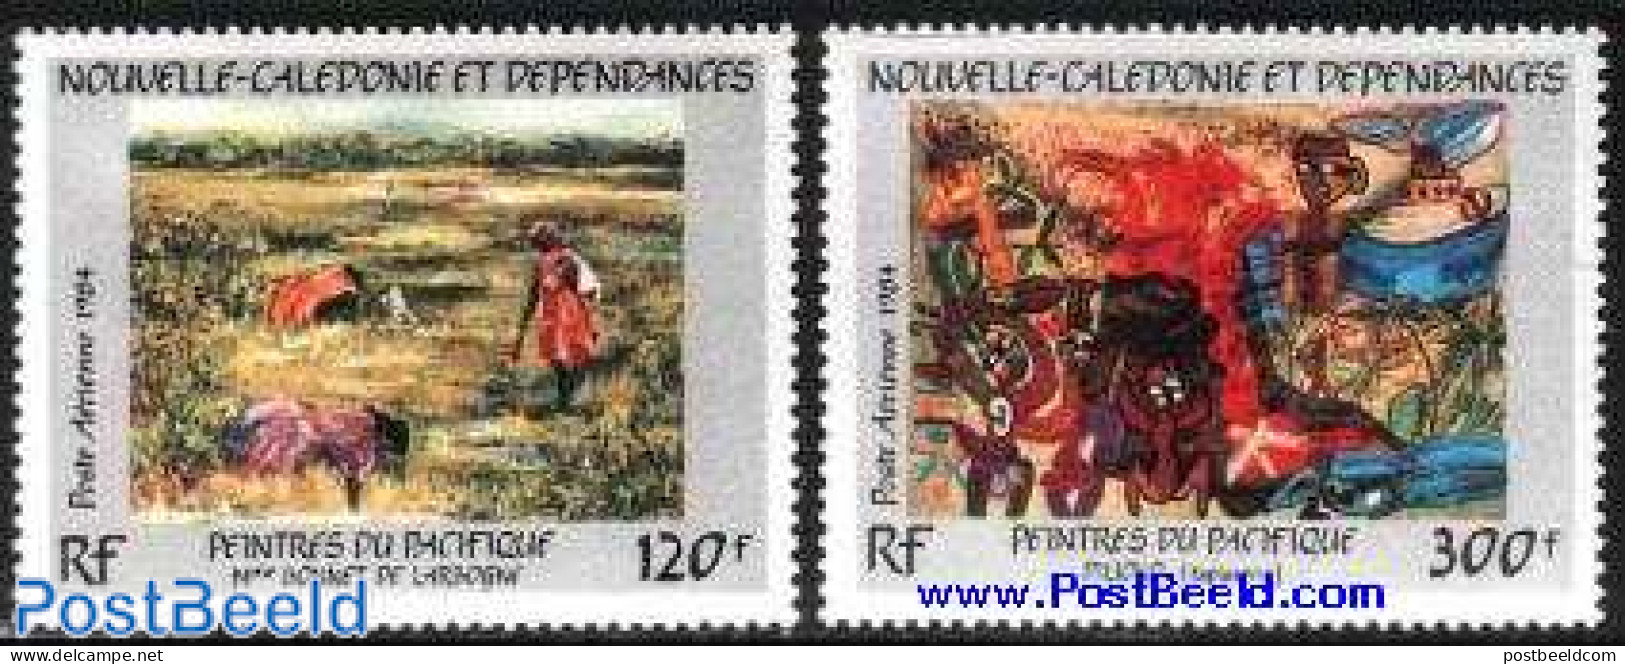 New Caledonia 1984 Pacific Paintings 2v, Mint NH, Art - Modern Art (1850-present) - Paintings - Nuovi